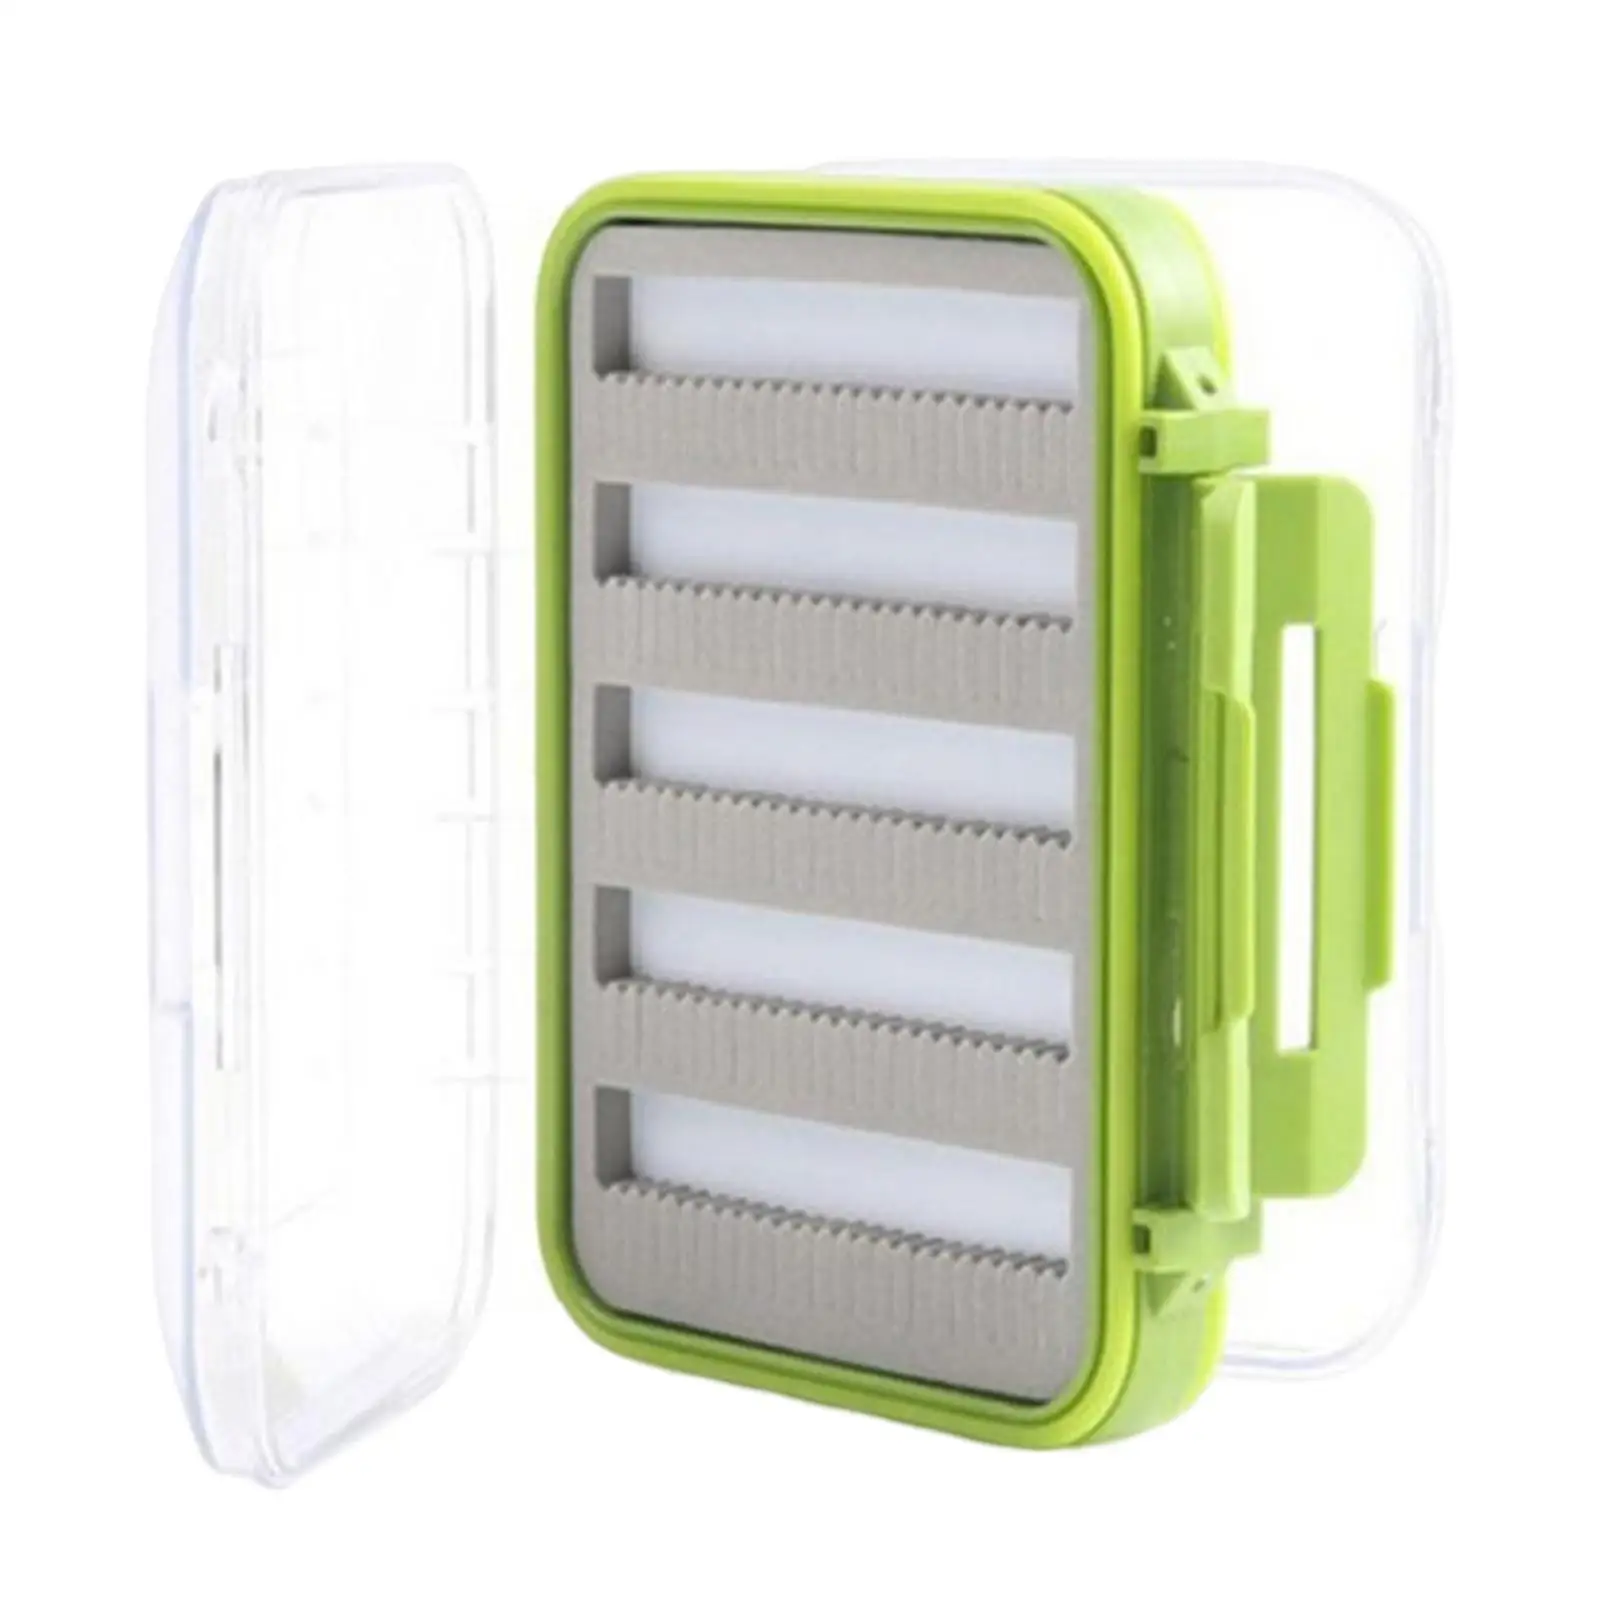 Slit Foam Waterproof Fly Fishing Box Case 3x1.3x4inch Accessory clear Lid  latches Sealed with Rubber Gasket